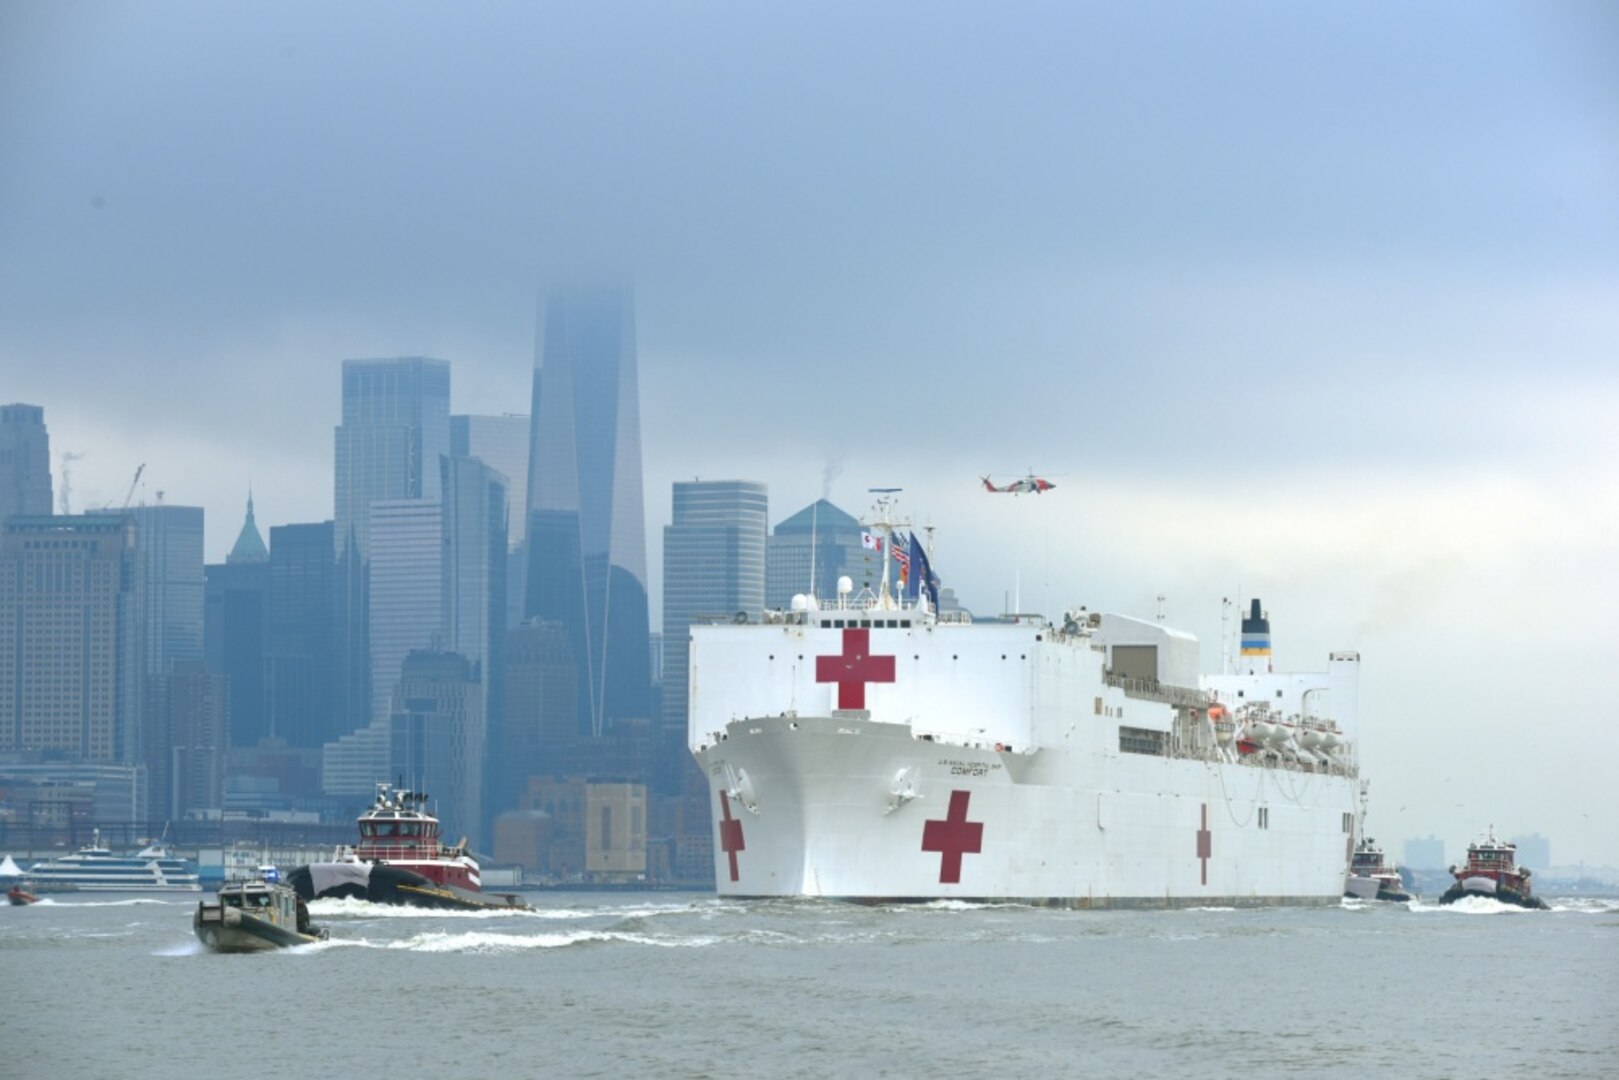 DLA provides critical mapping support, enables USNS Comfort’s COVID-19 NYC support